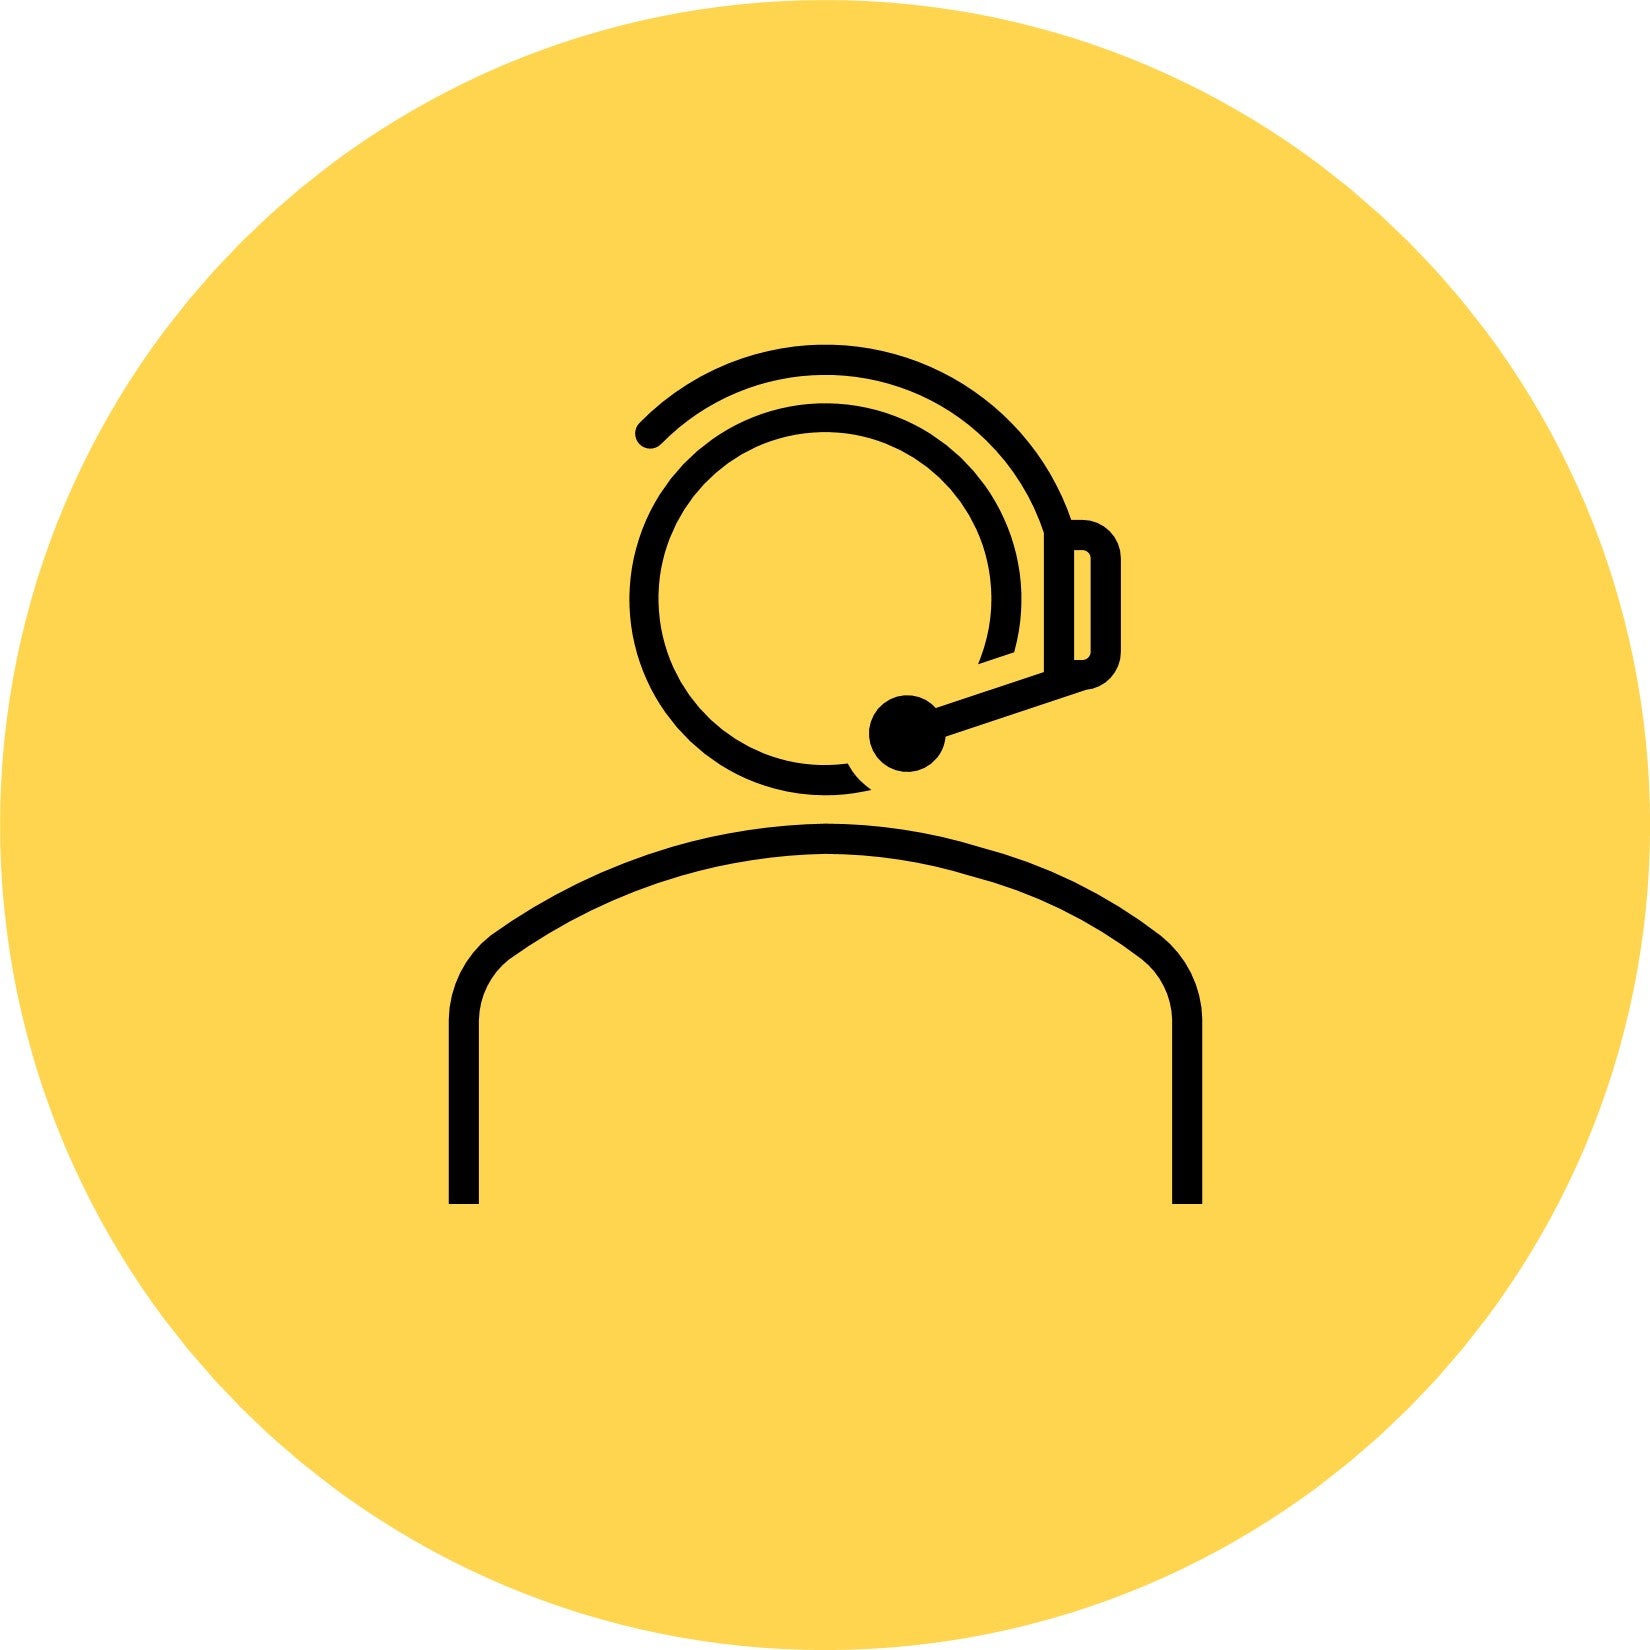 Line icon of person with headset on